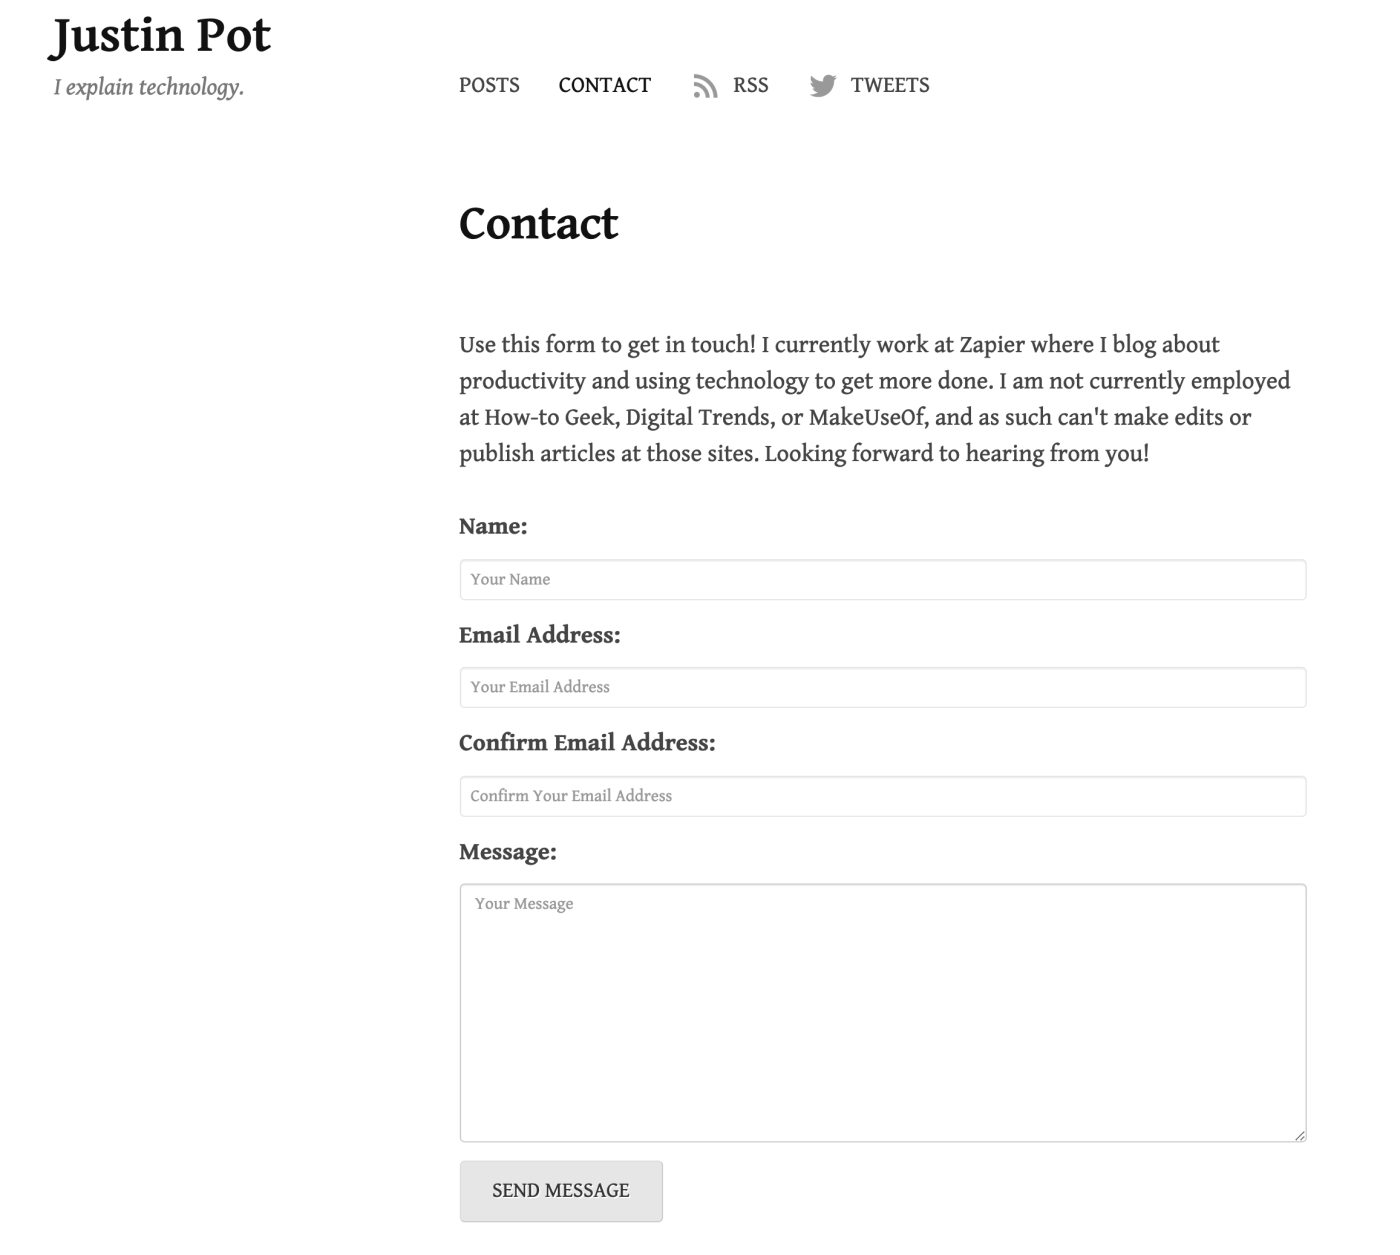 The contact form on Justin Pot's personal website